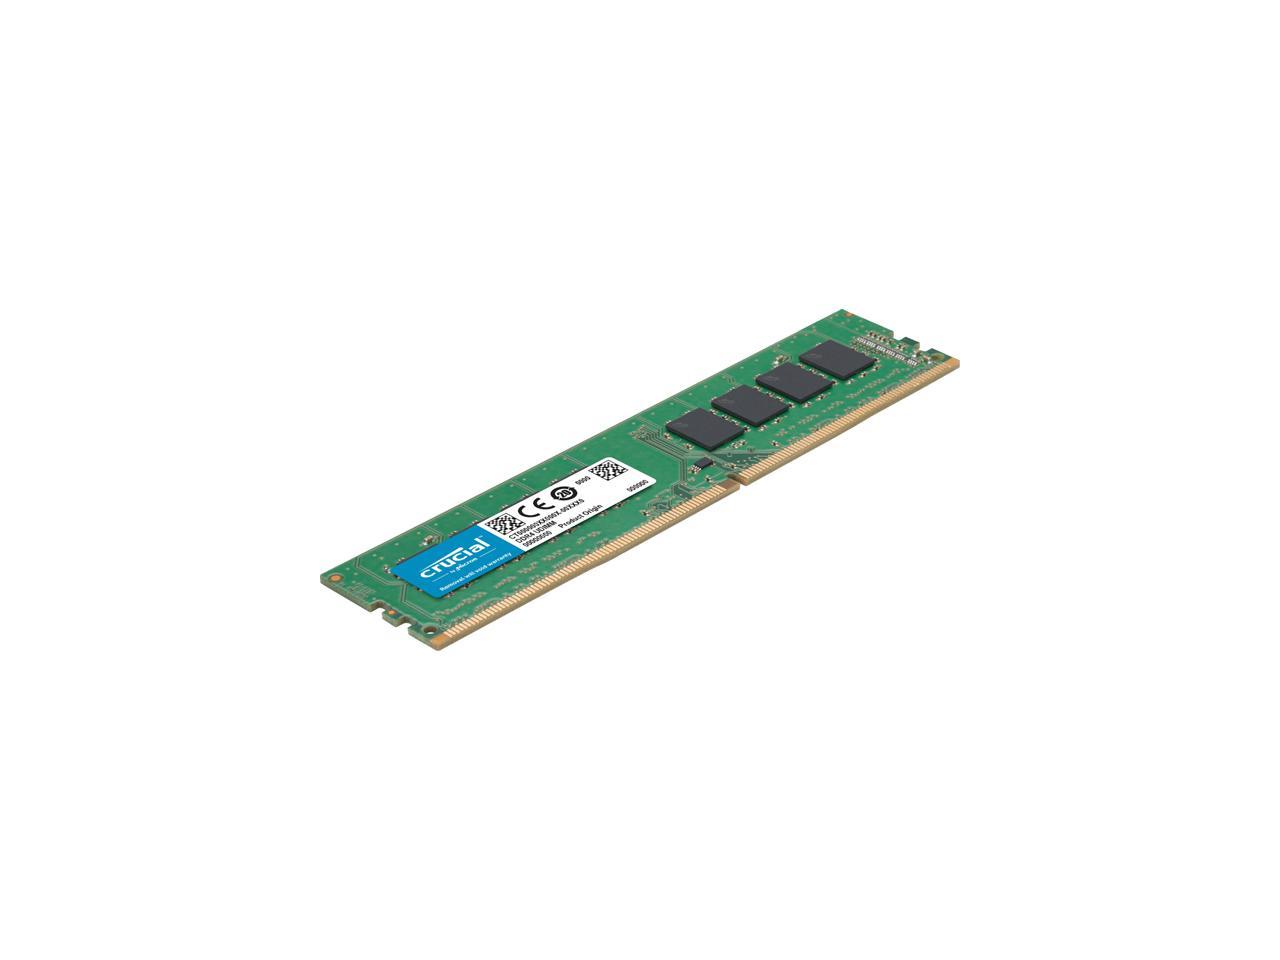 Crucial 32GB Single DDR4 3200 MT/s CL22 DIMM 288-Pin Memory - CT32G4DFD832A